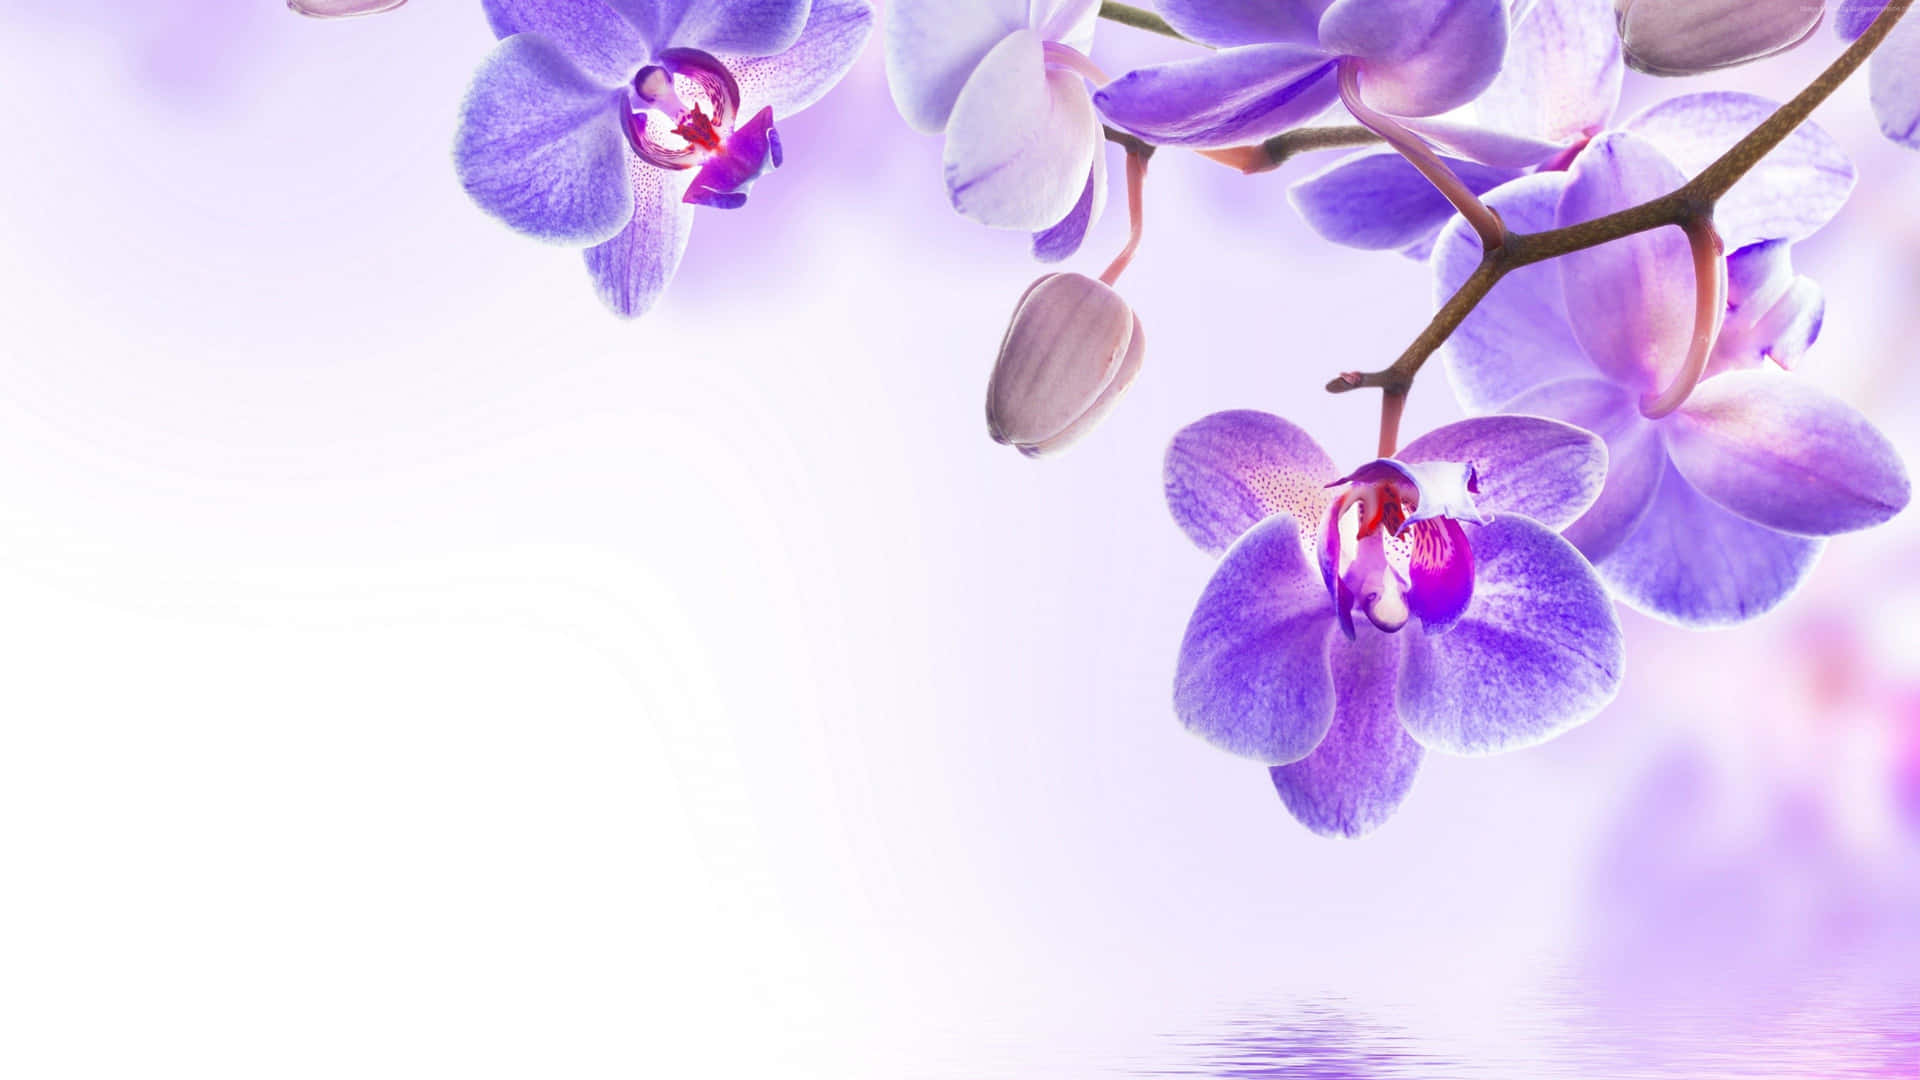 Nature’s Beauty - A Bunch of Fragrant Orchids